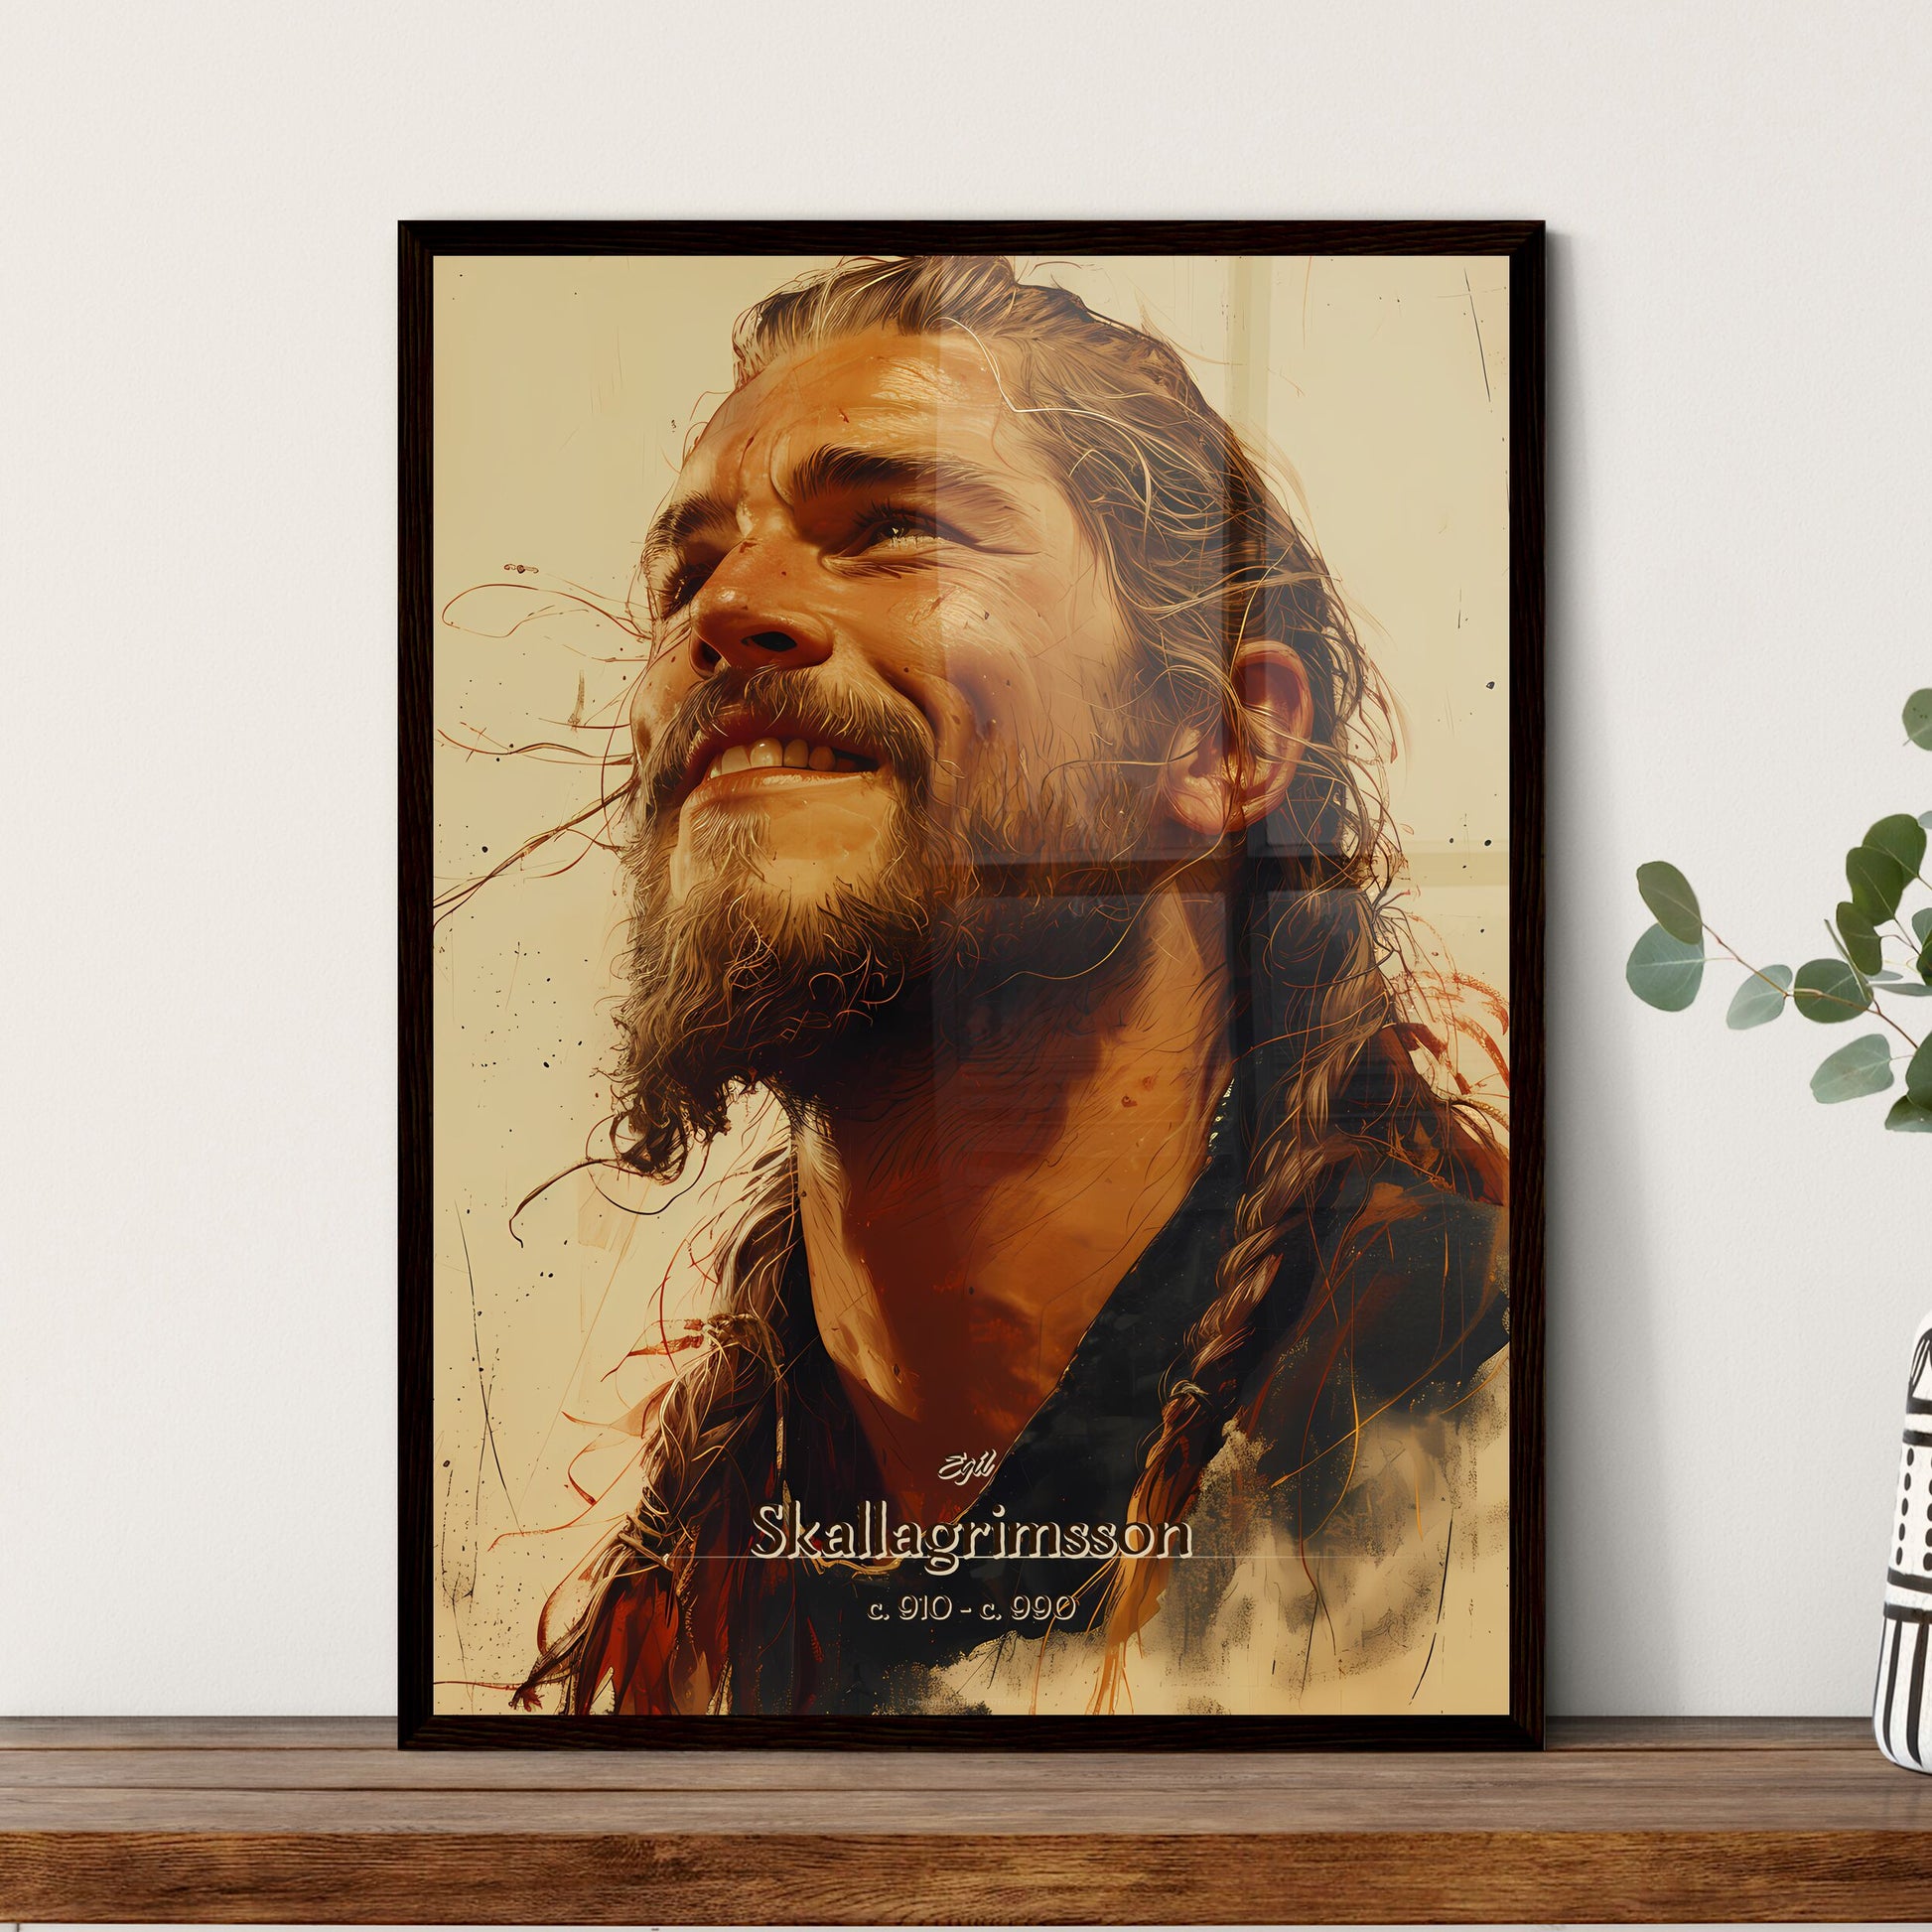 Egil, Skallagrimsson, c. 910 - c. 990, A Poster of a man with long hair and braided hair smiling Default Title